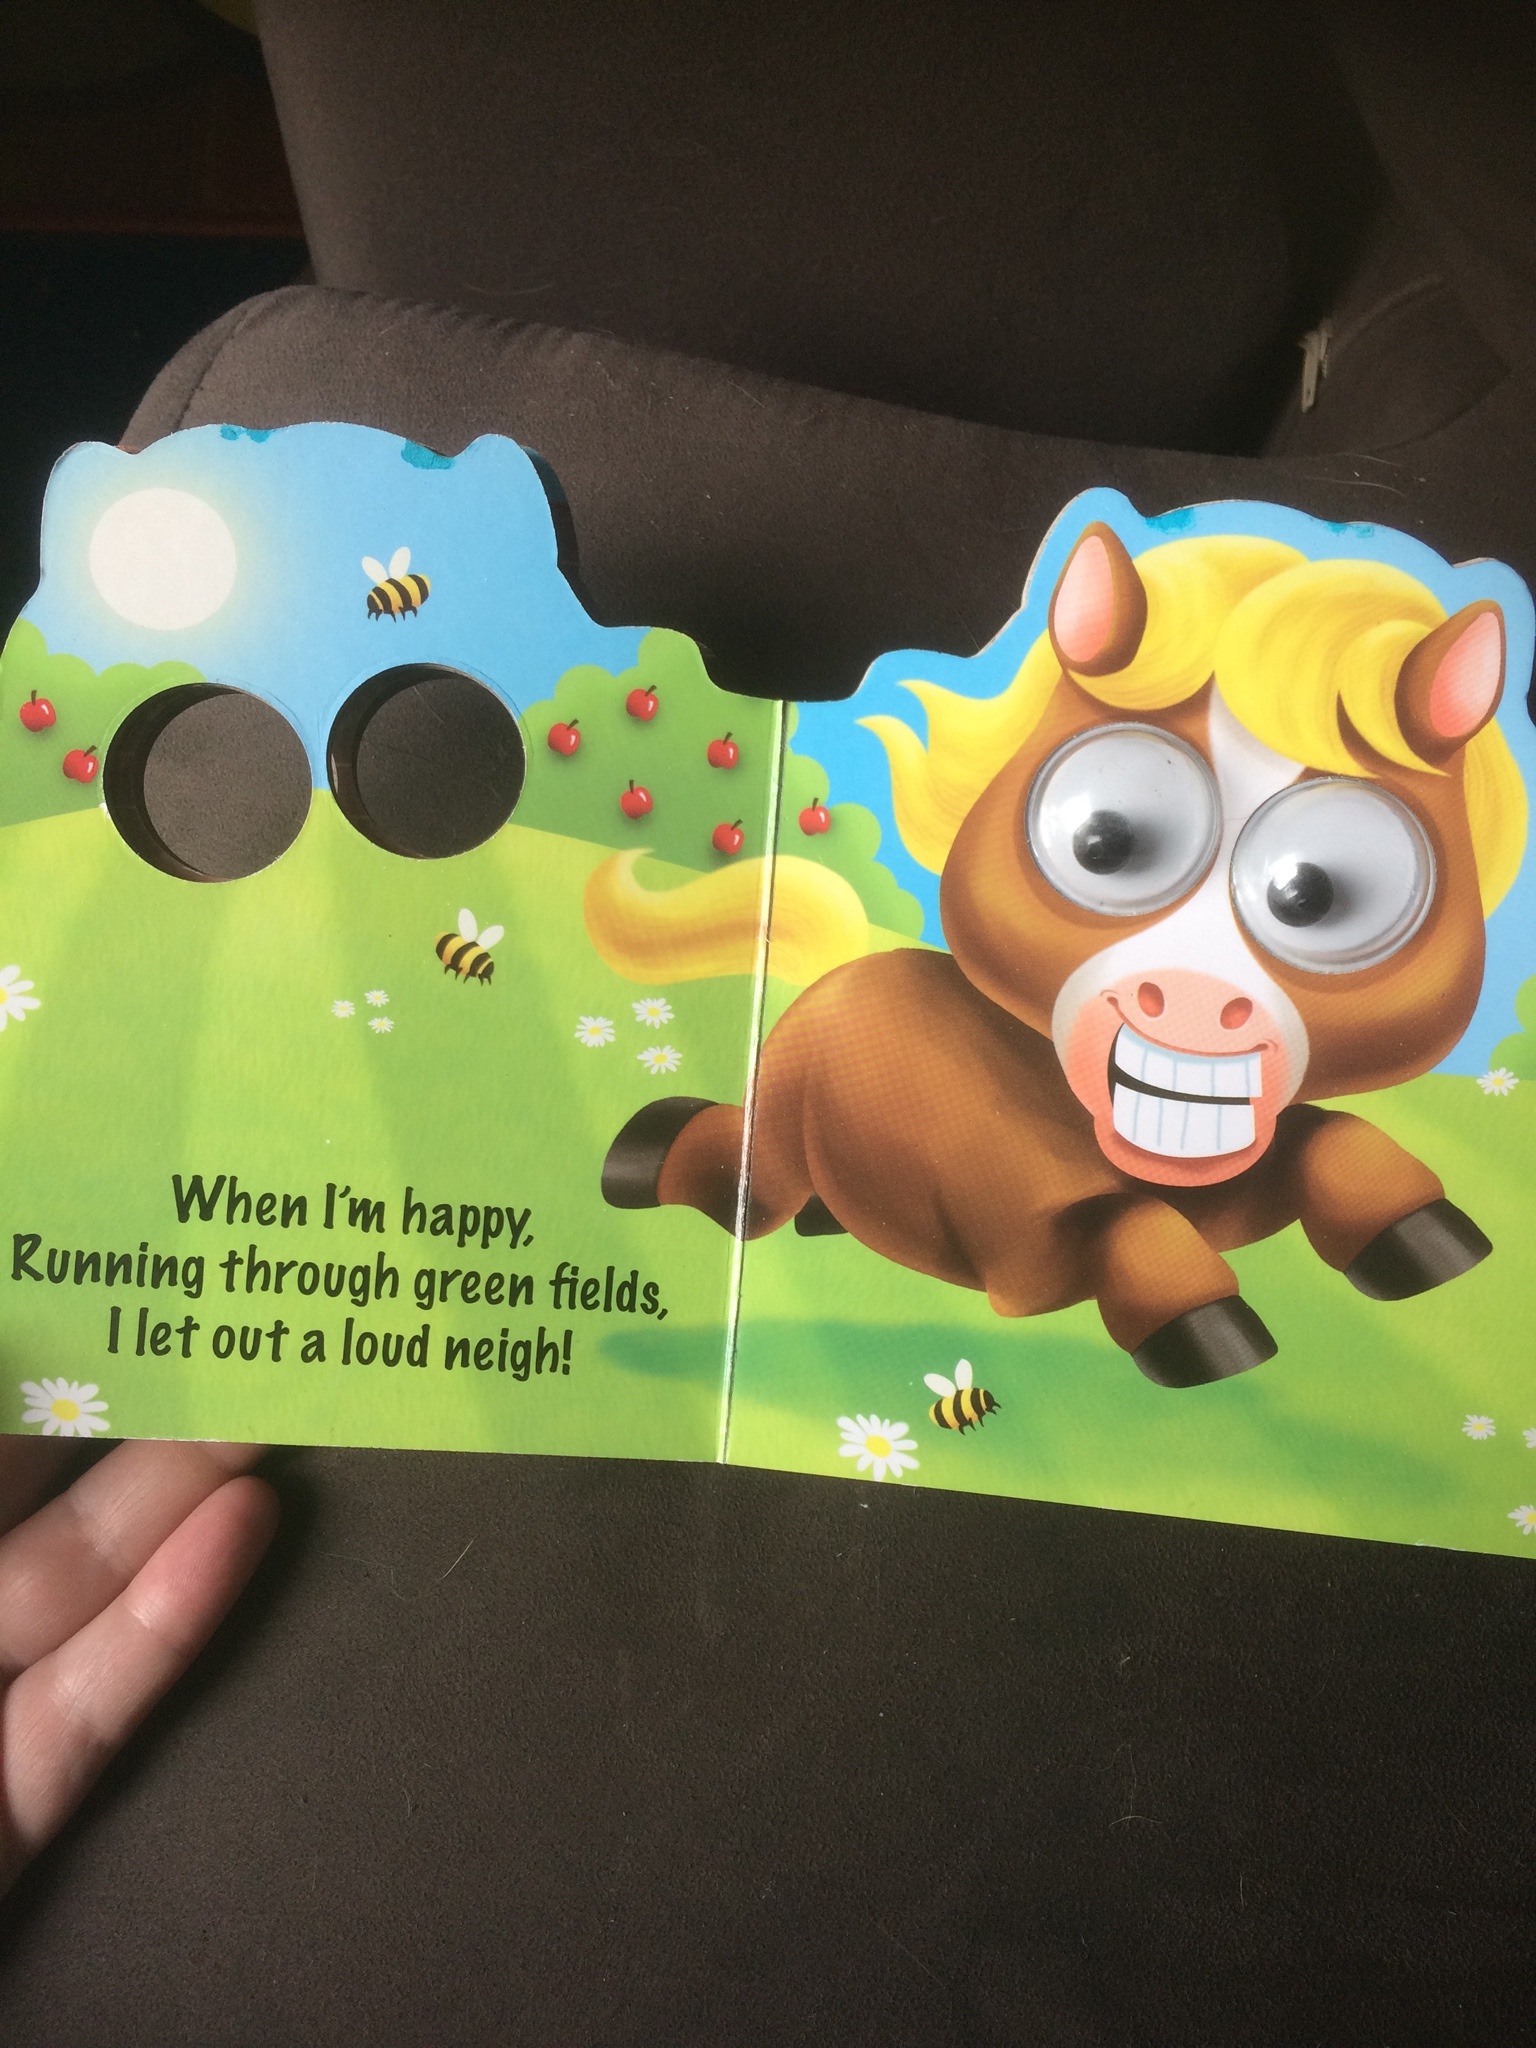 Sex drferox:Today’s Deeply Cursed kids book pictures